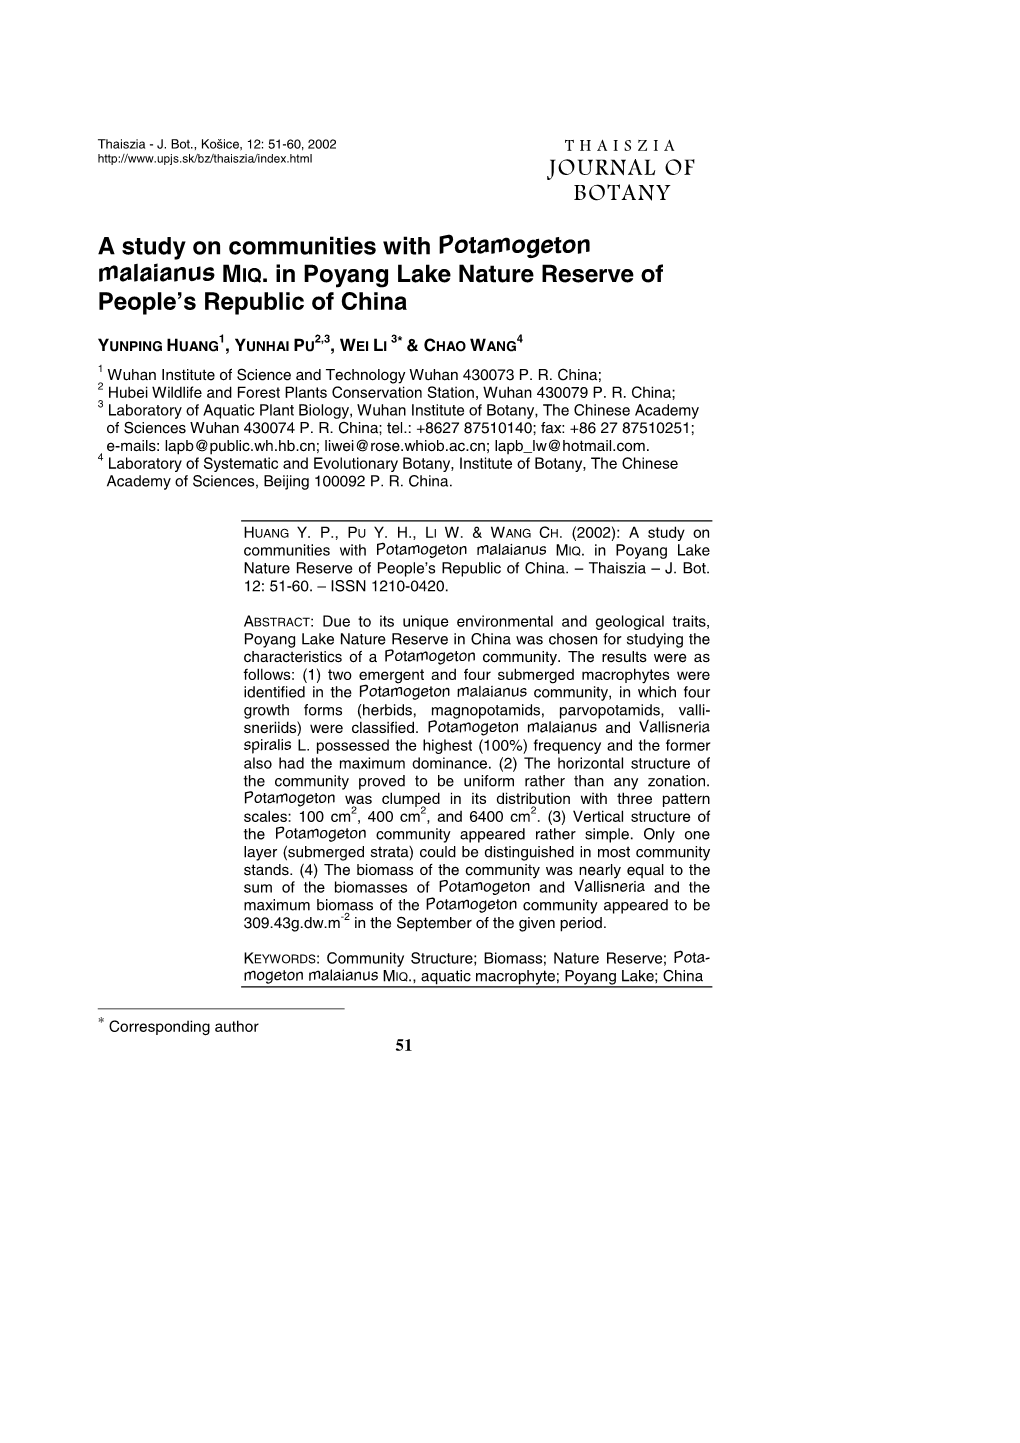 JOURNAL of BOTANY a Study on Communities with Potamogeton